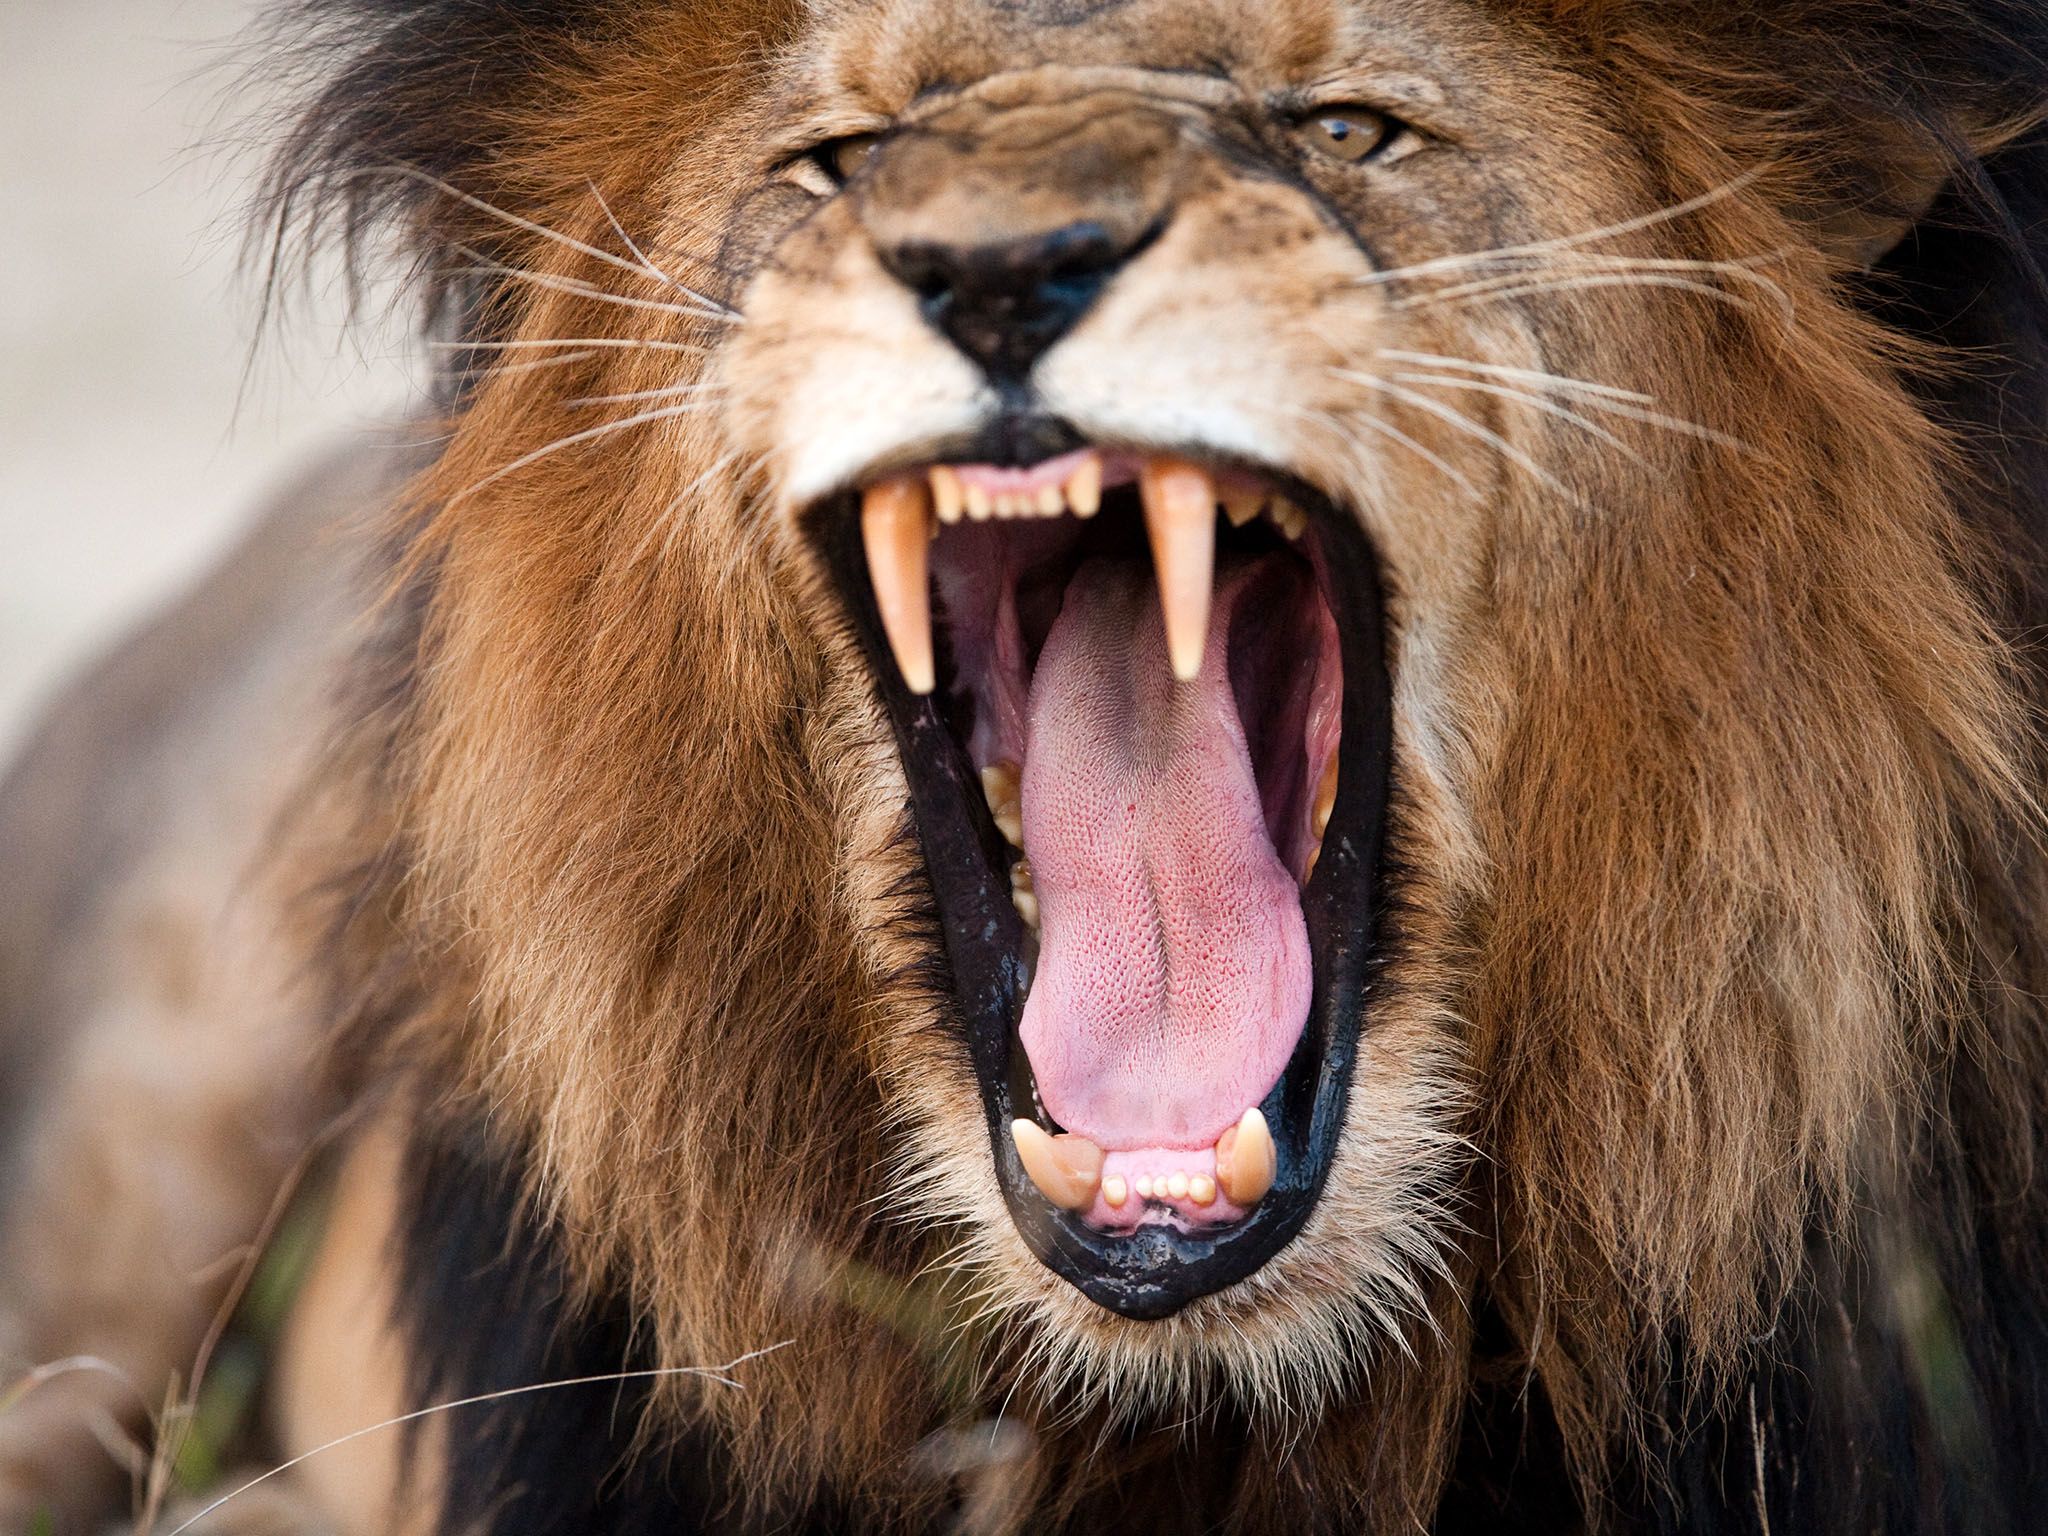 South Africa: An adult Lion's roar can be heard up to 5 miles (8 kilometres) away. This image is... [Photo of the day - December 2016]